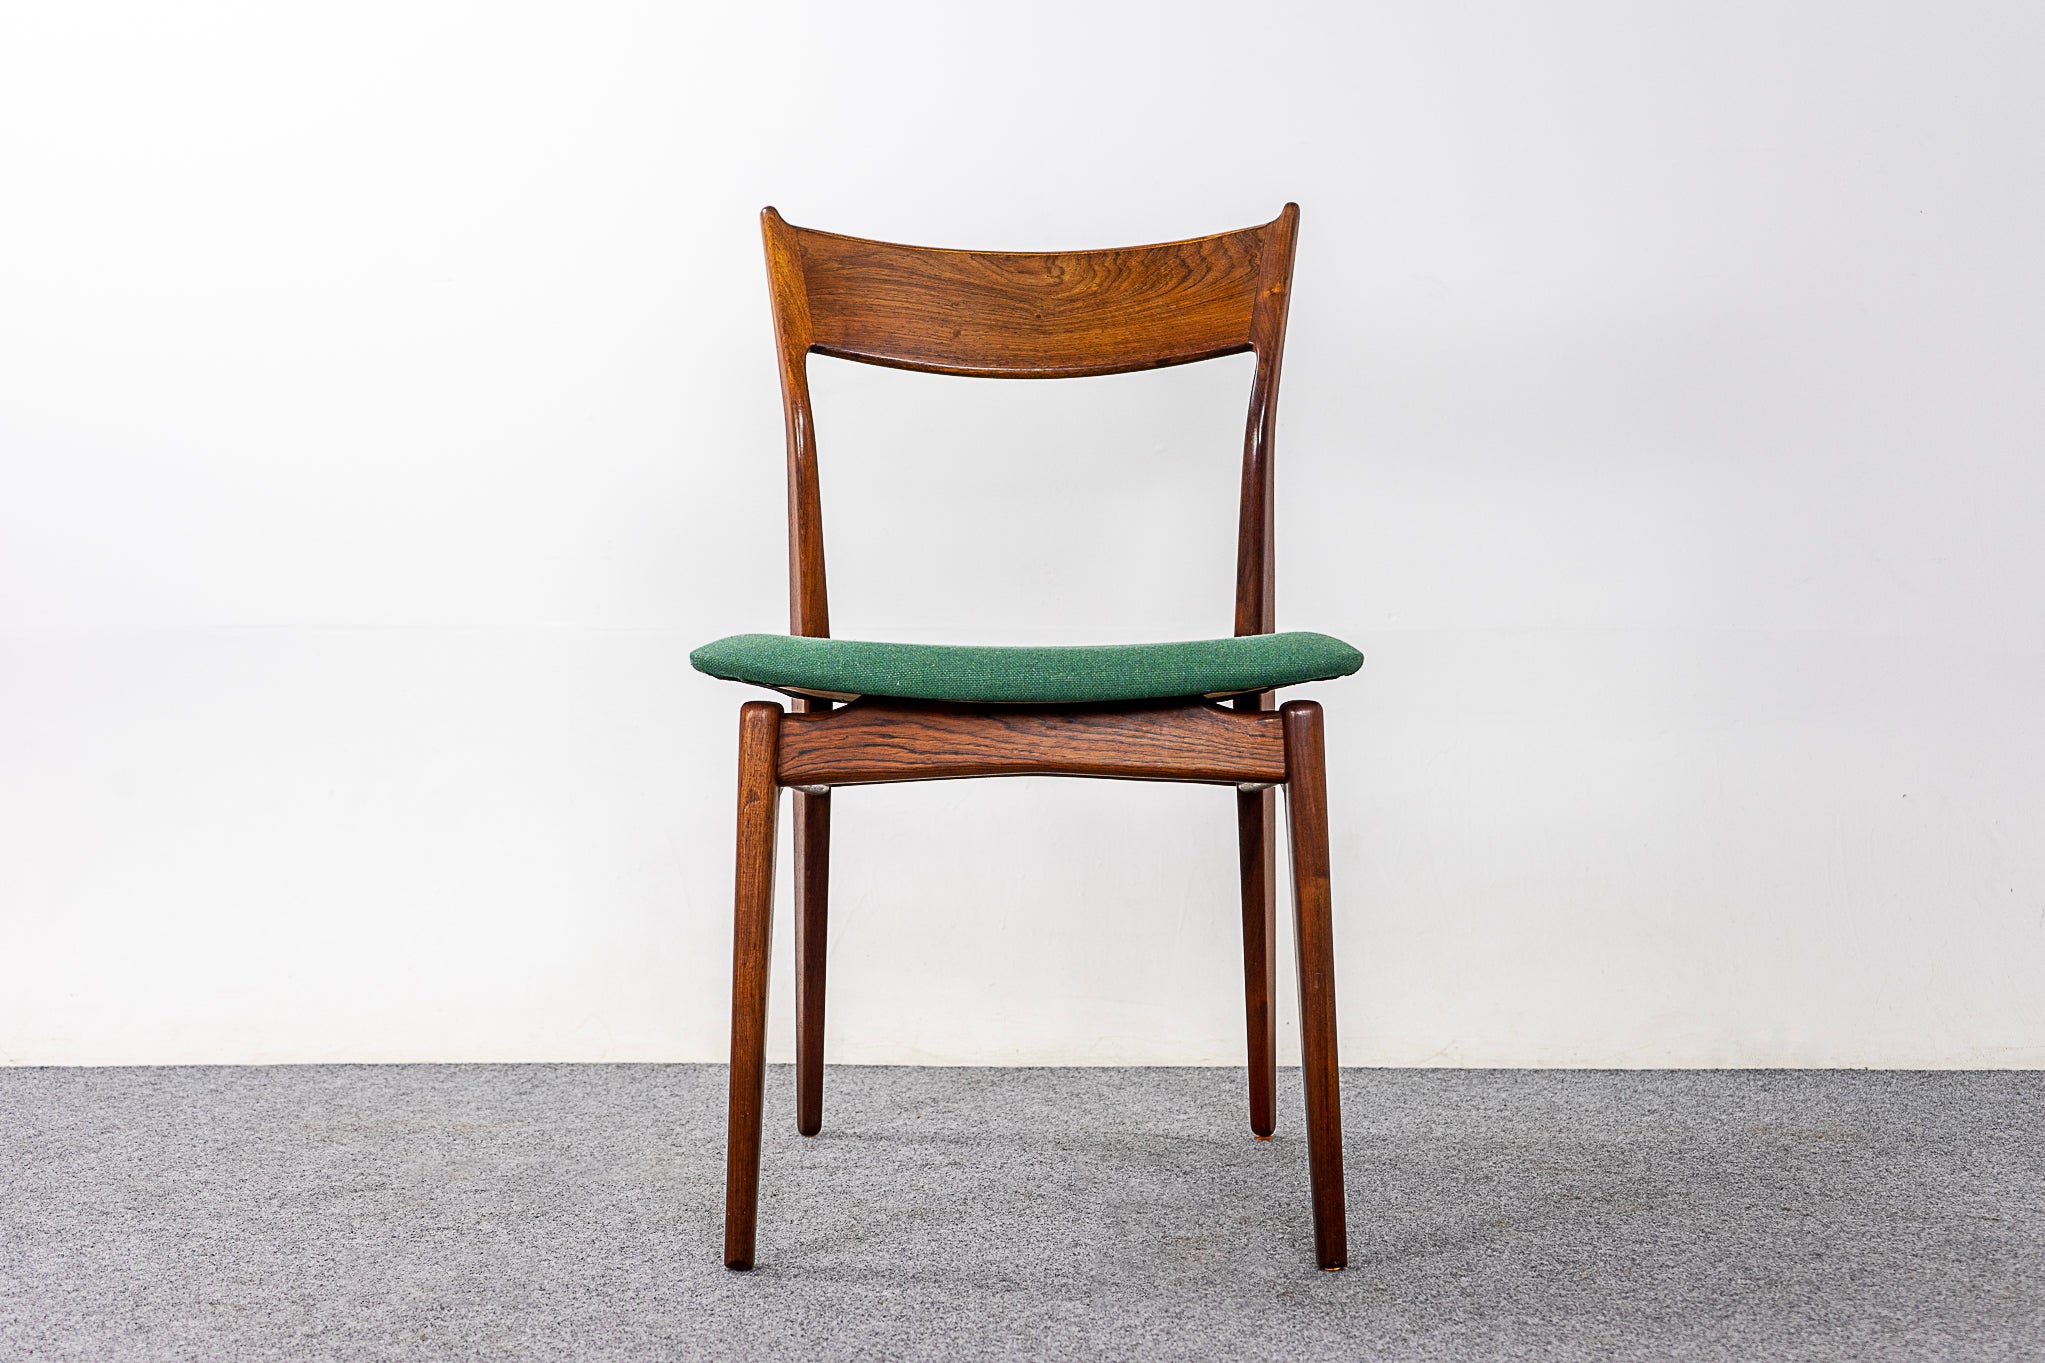 6 Danish Rosewood Dining Chairs, by HP Hansen